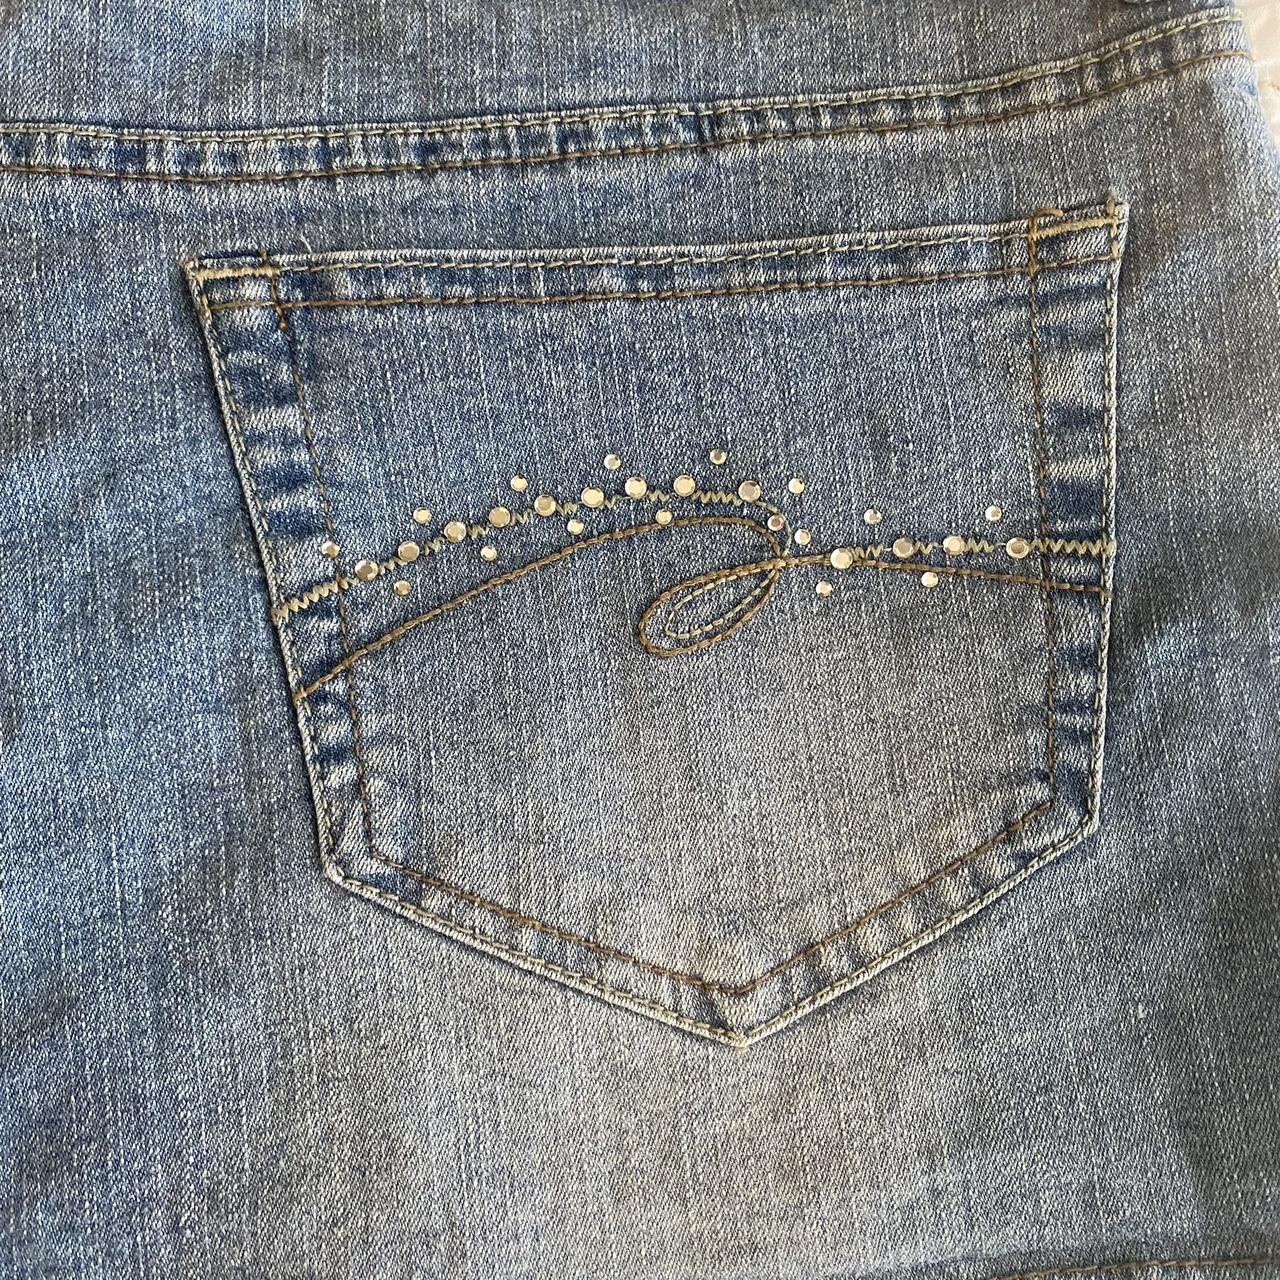 Vintage y2k bedazzled shorts, Super cute bedazzled